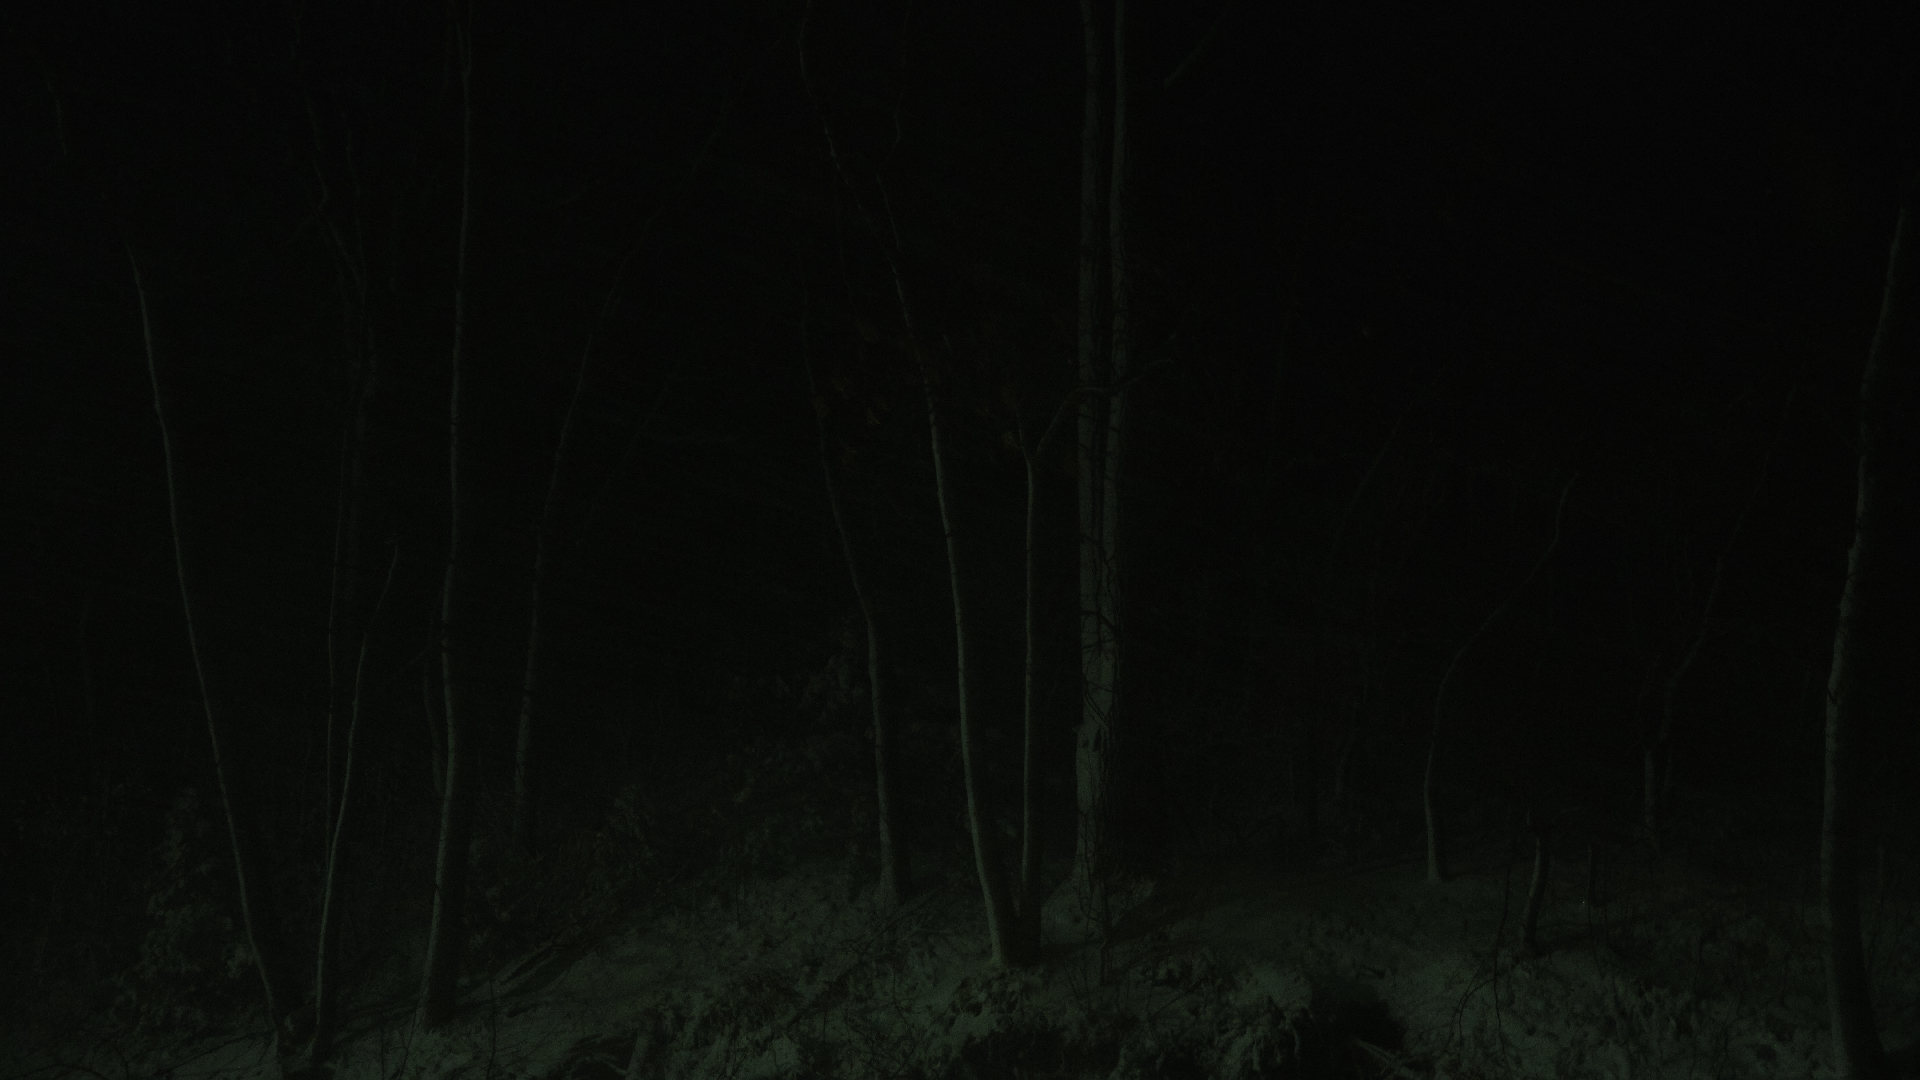 a dark and gloomy wallpaper-sized image of some woods